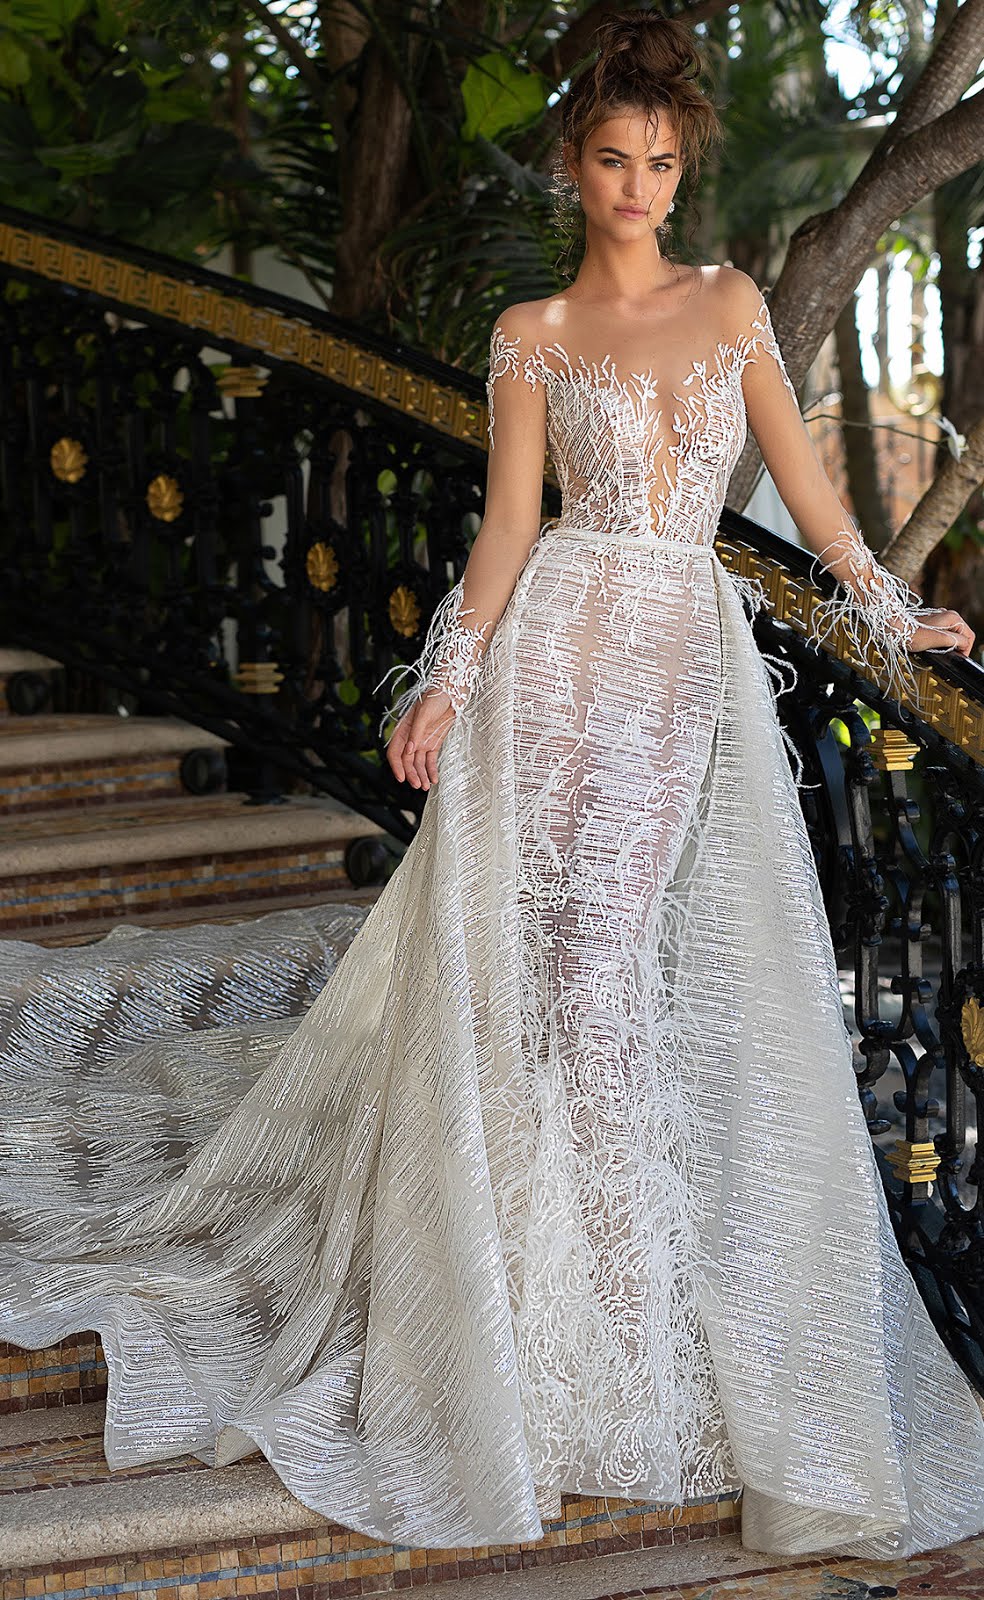 #BERTA Miami collection at the Versace Mansion!